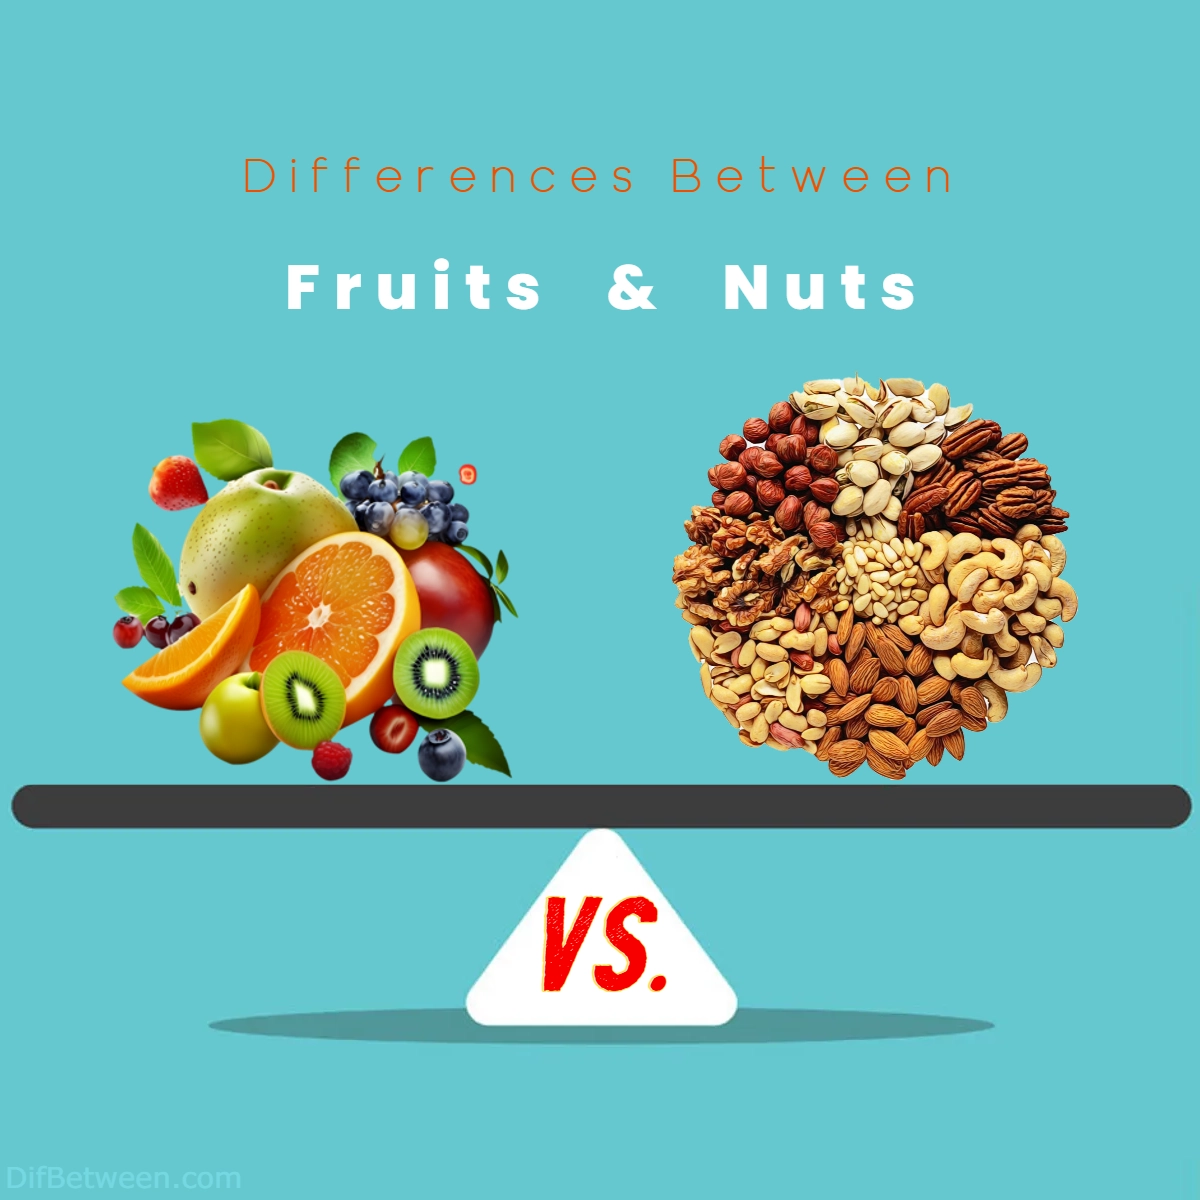 Difference Between Fruits and Nuts